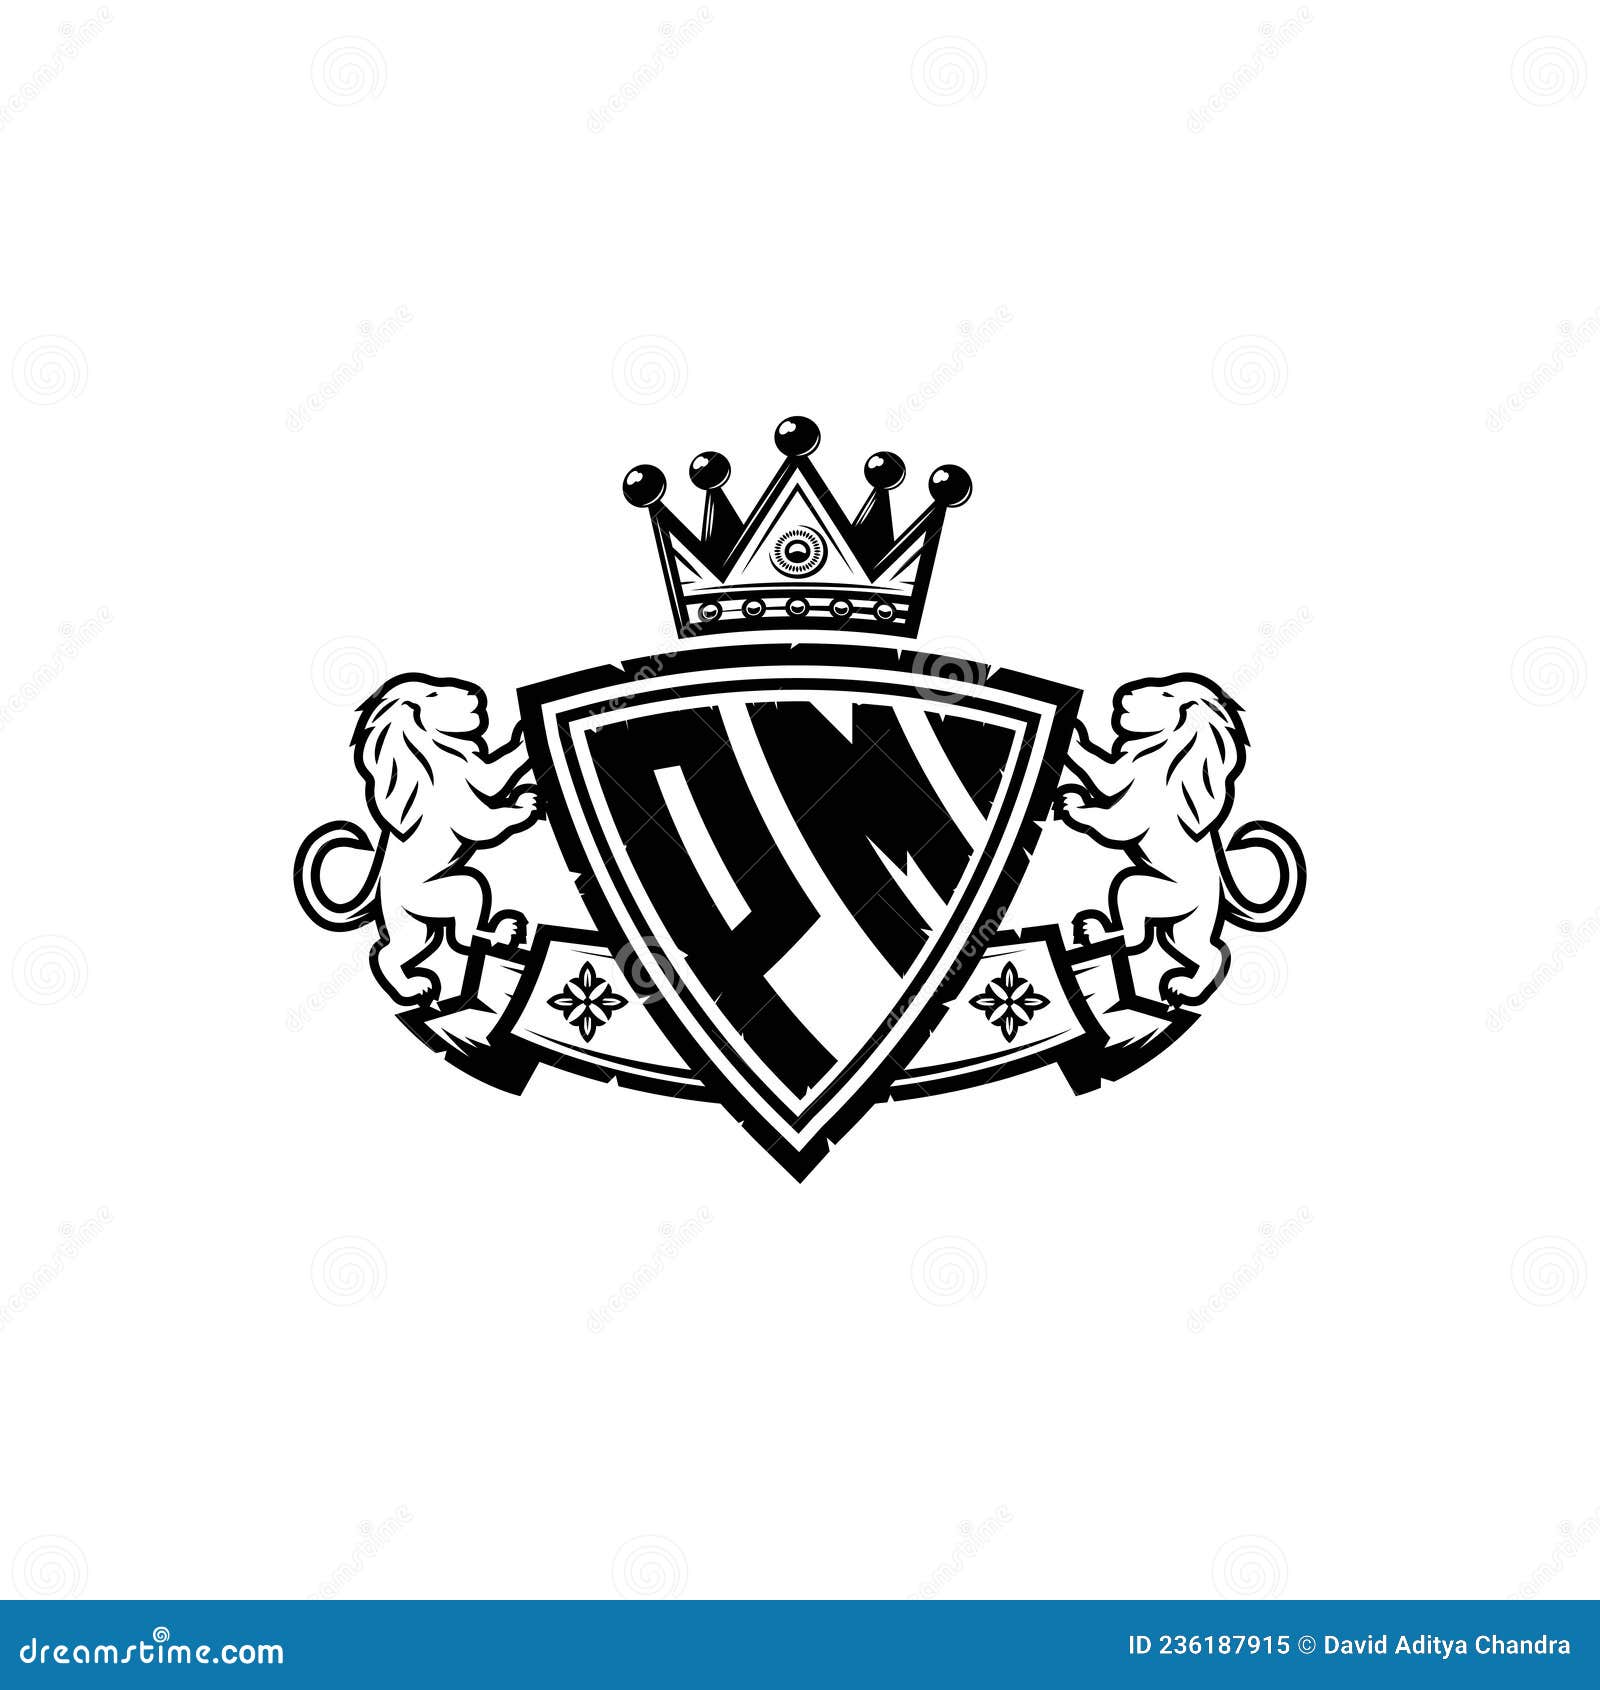 Letter pm logo monogram emblem style with crown Vector Image